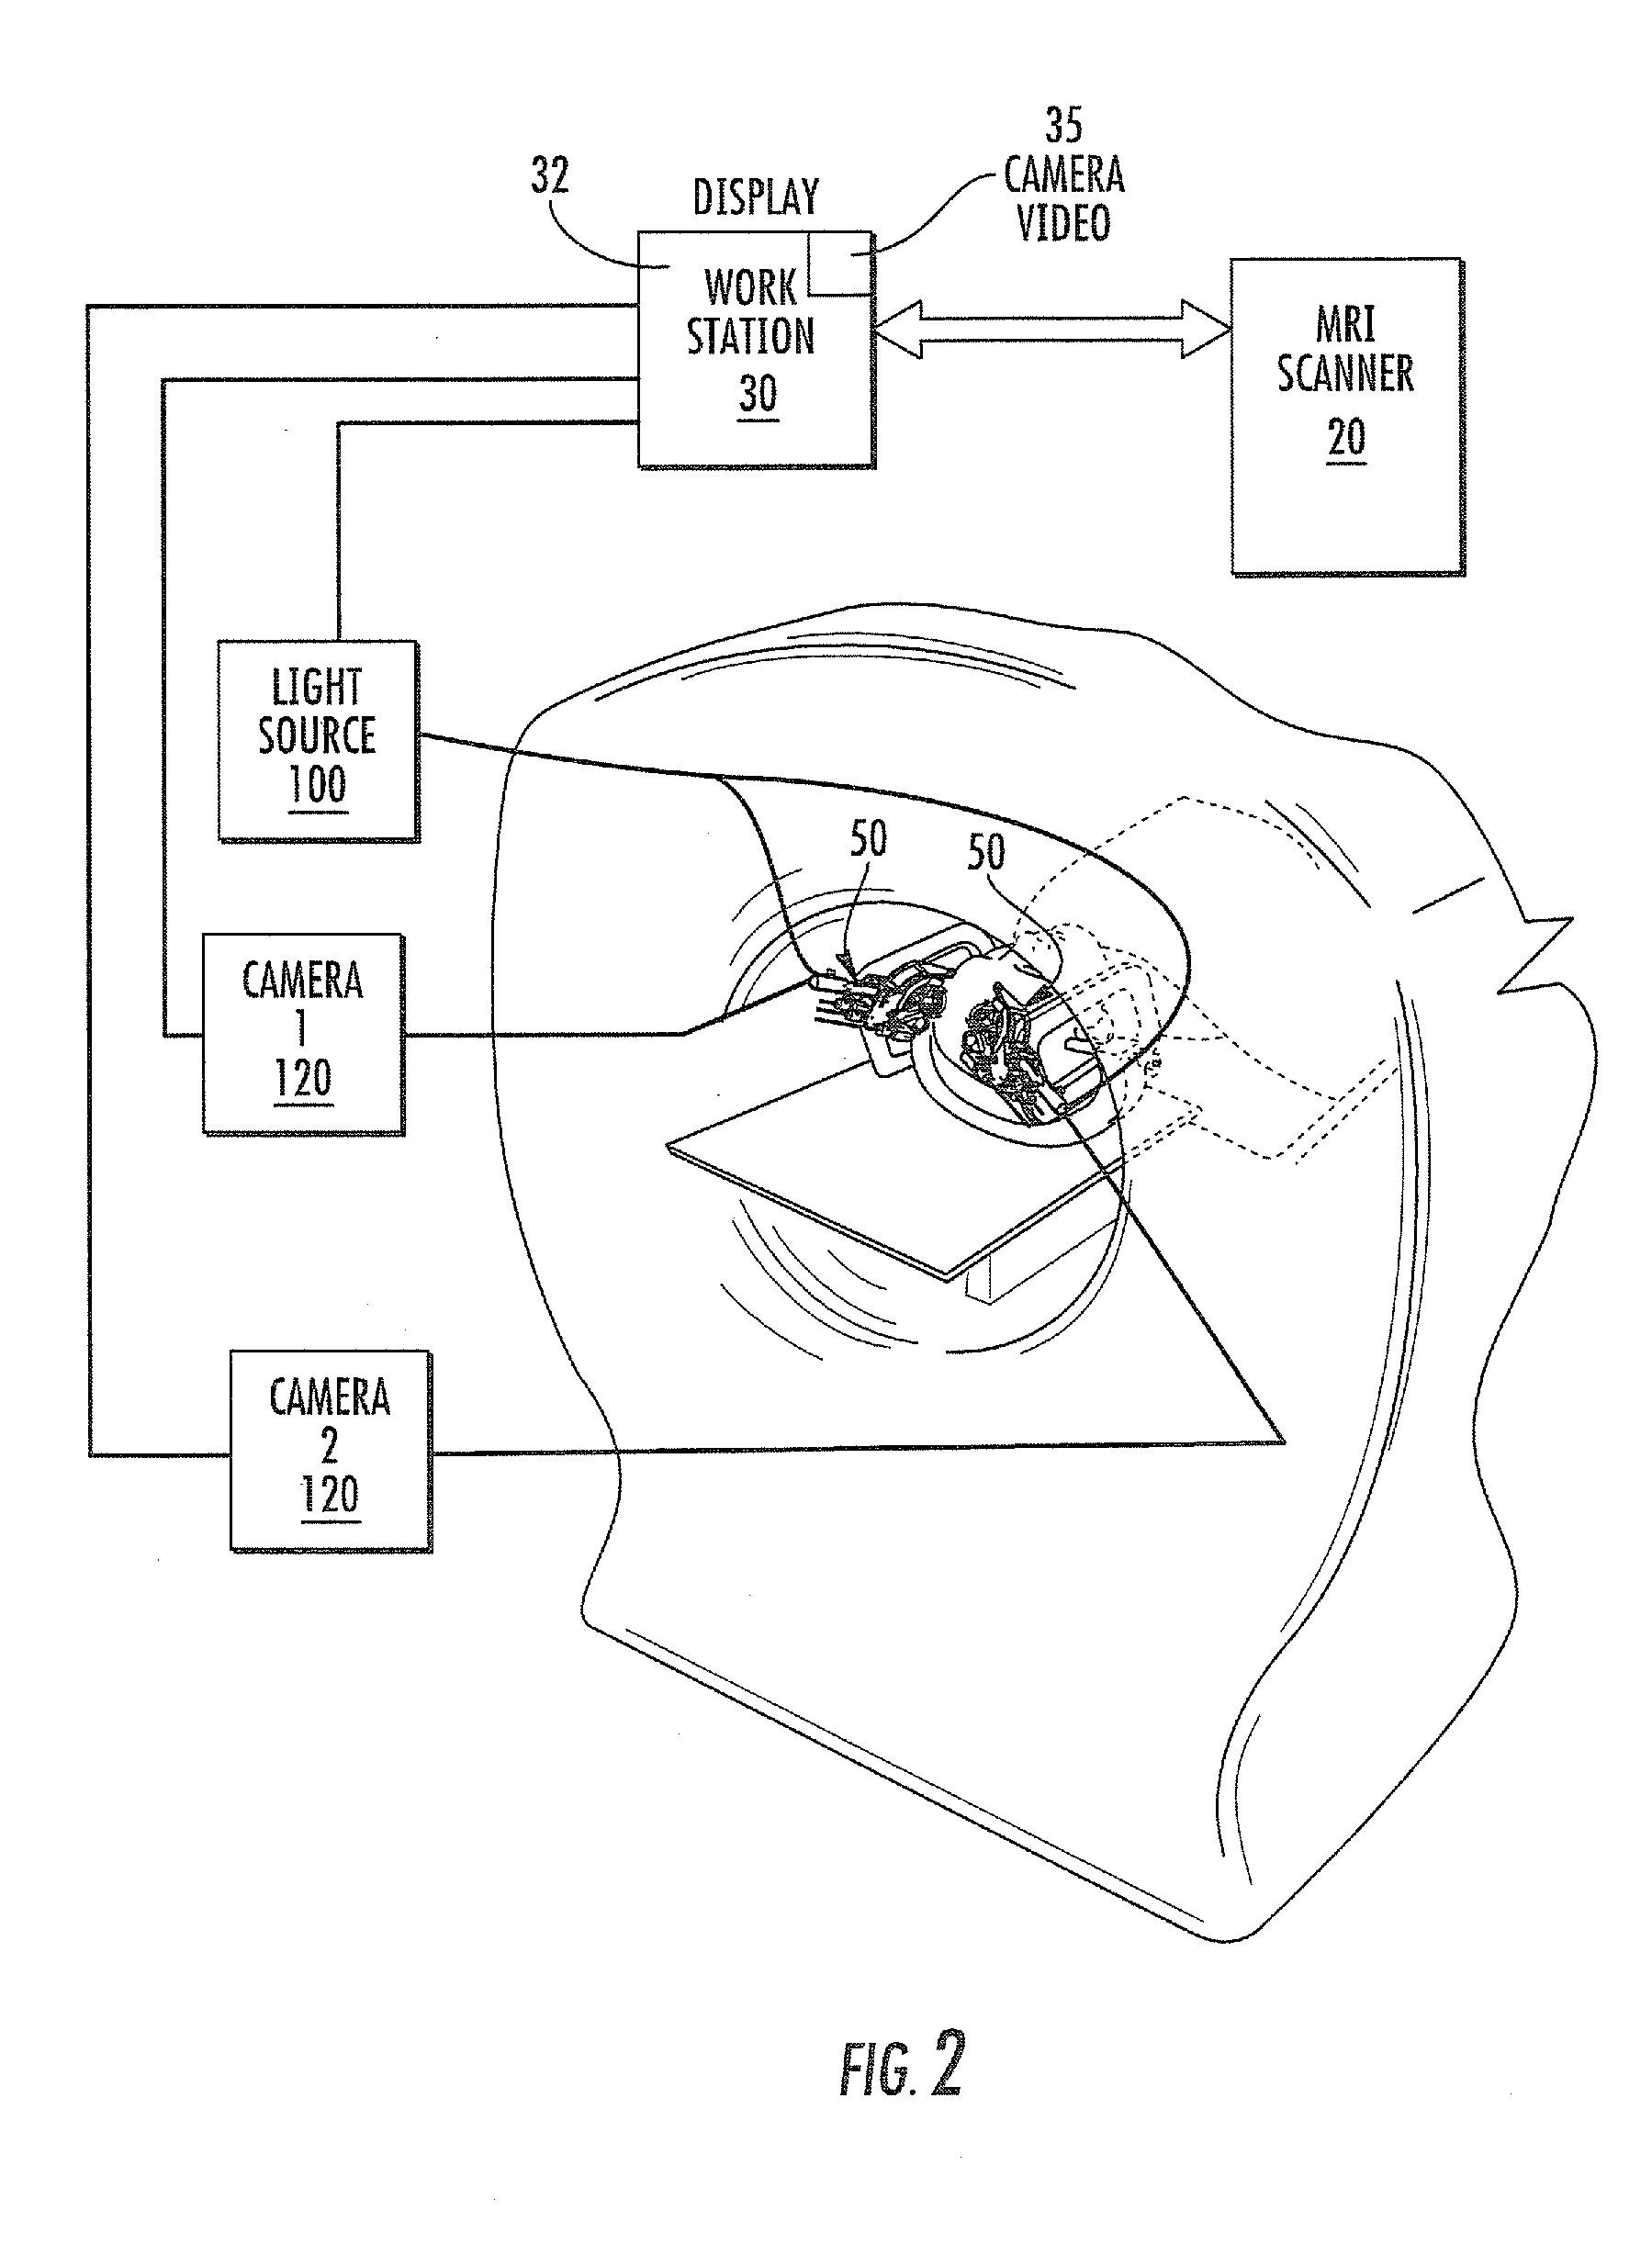 MRI surgical systems for real-time visualizations using MRI image data and predefined data of surgical tools